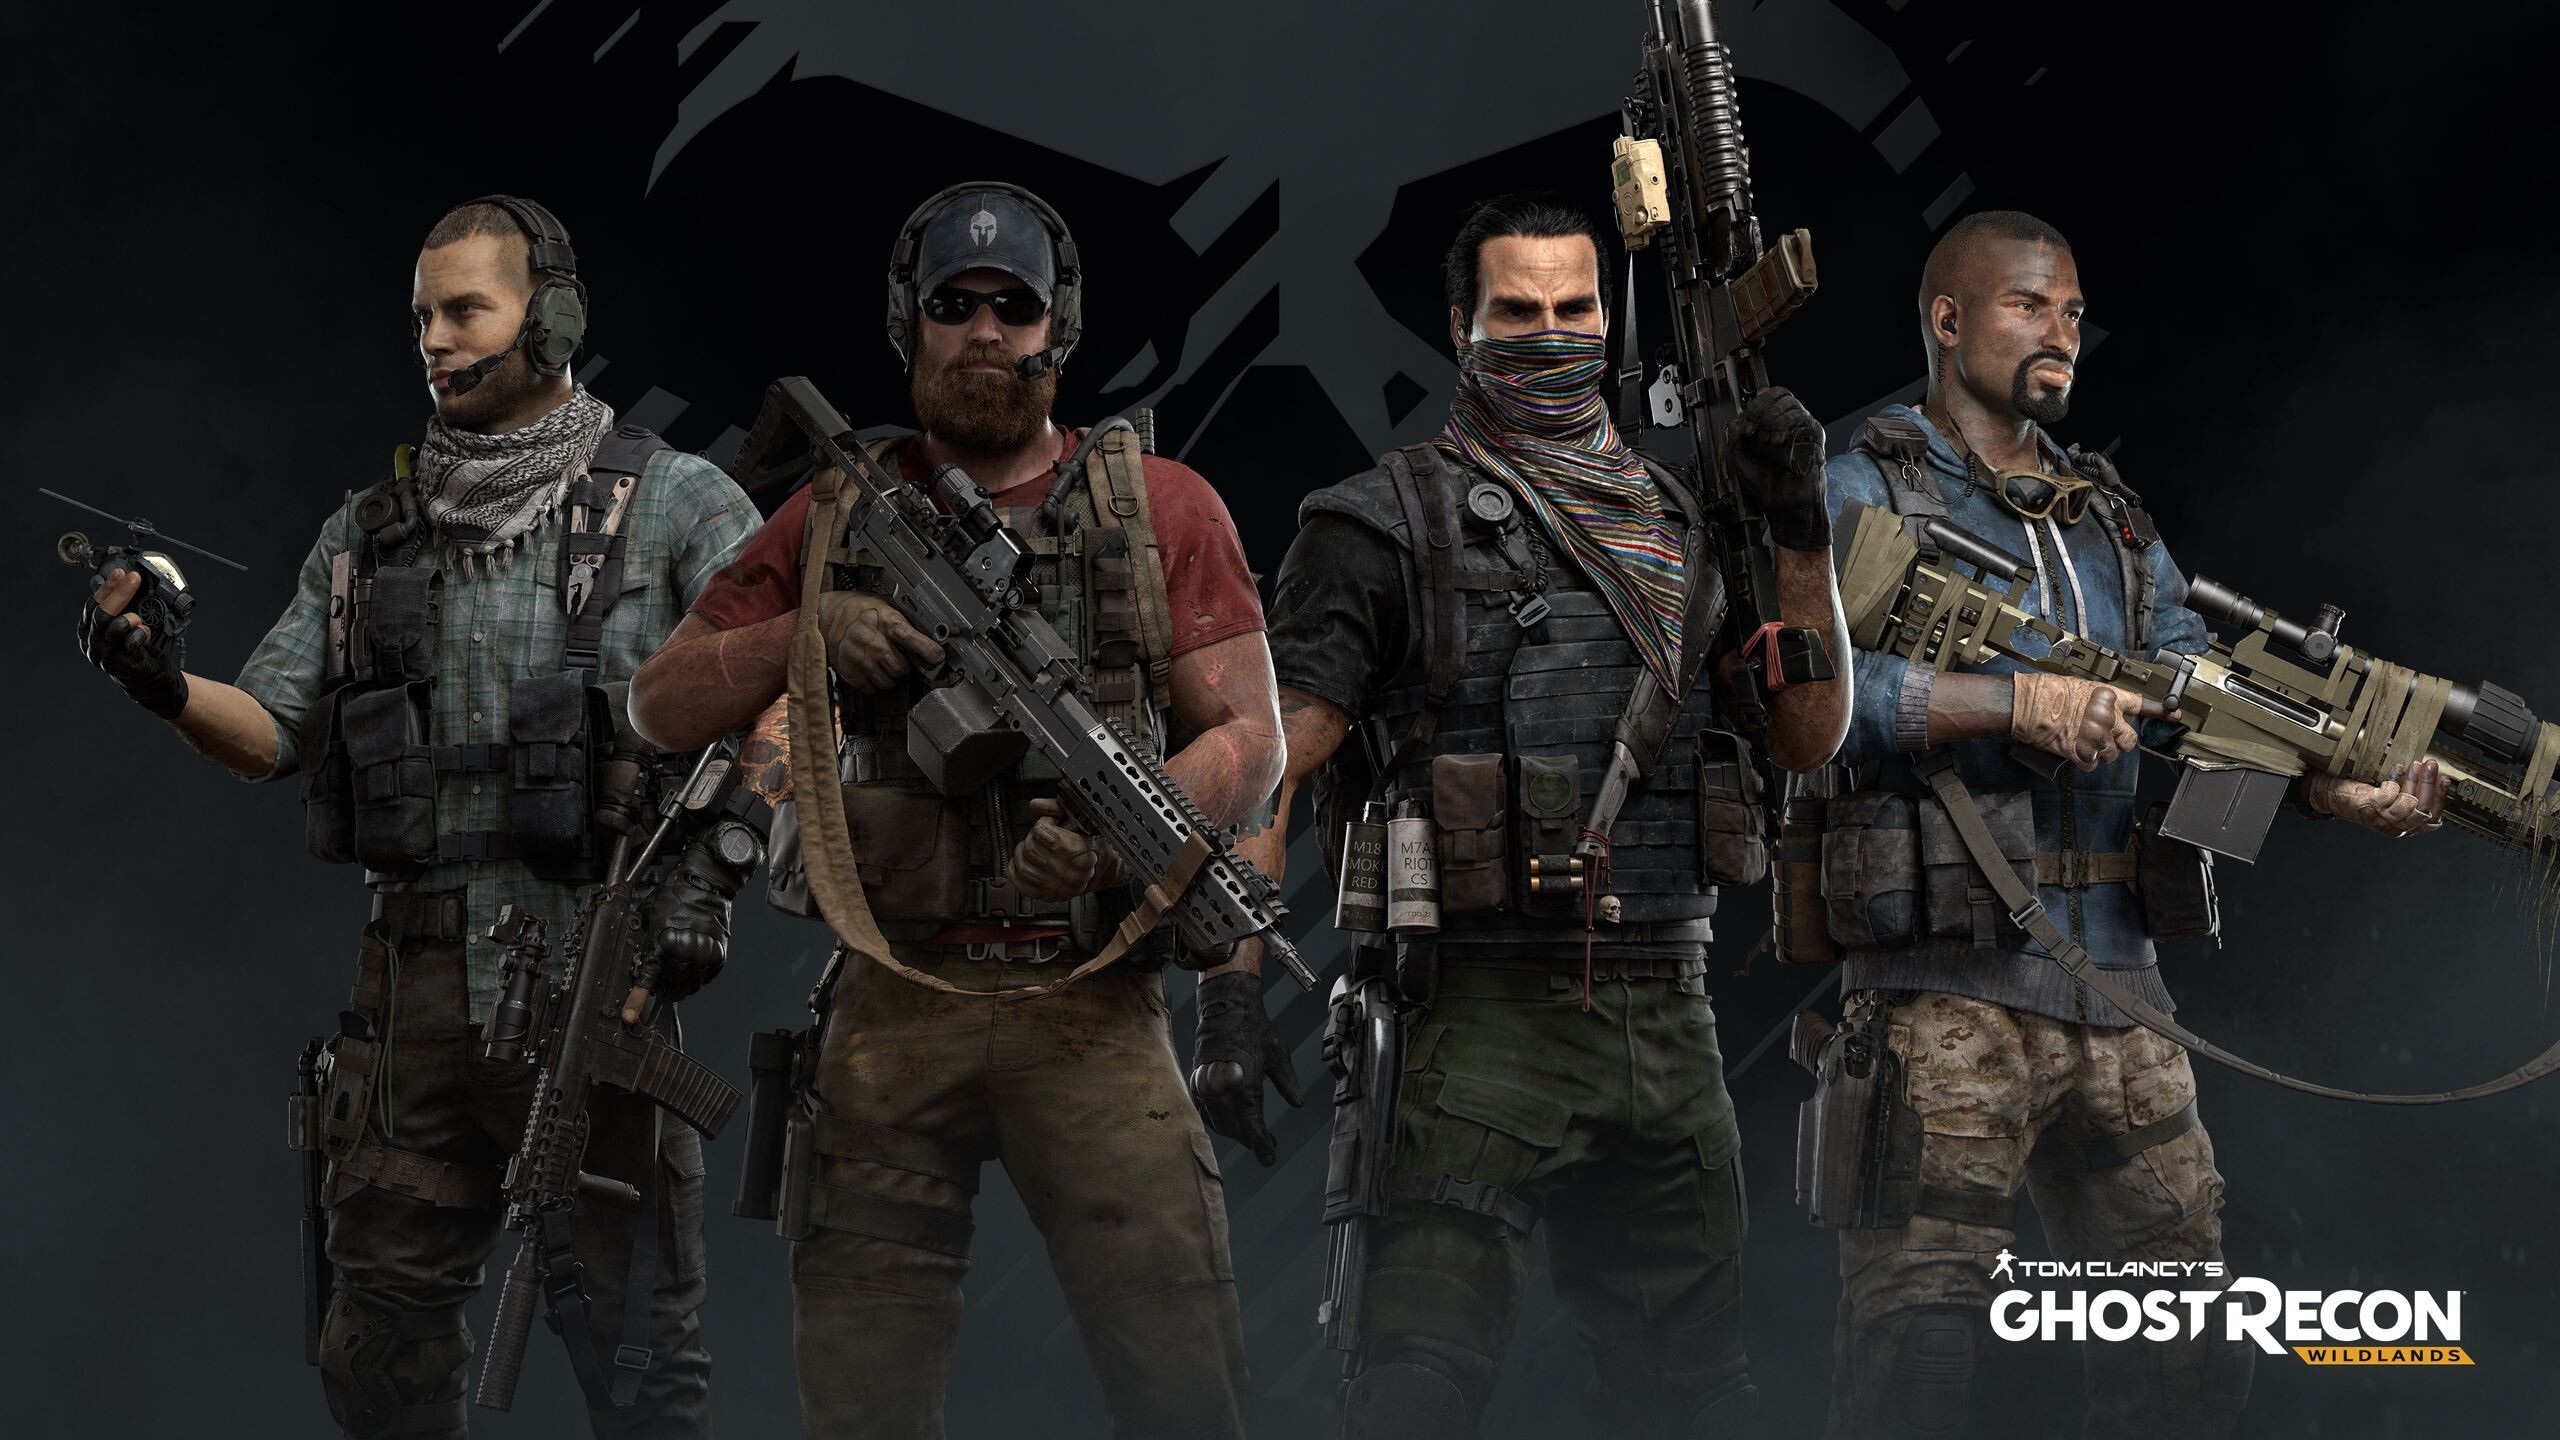 Ghost Recon: Wildlands: Nomad, Midas, Holt, Weaver, The leader with his ghosts team, SpecOps soldiers. 2560x1440 HD Background.